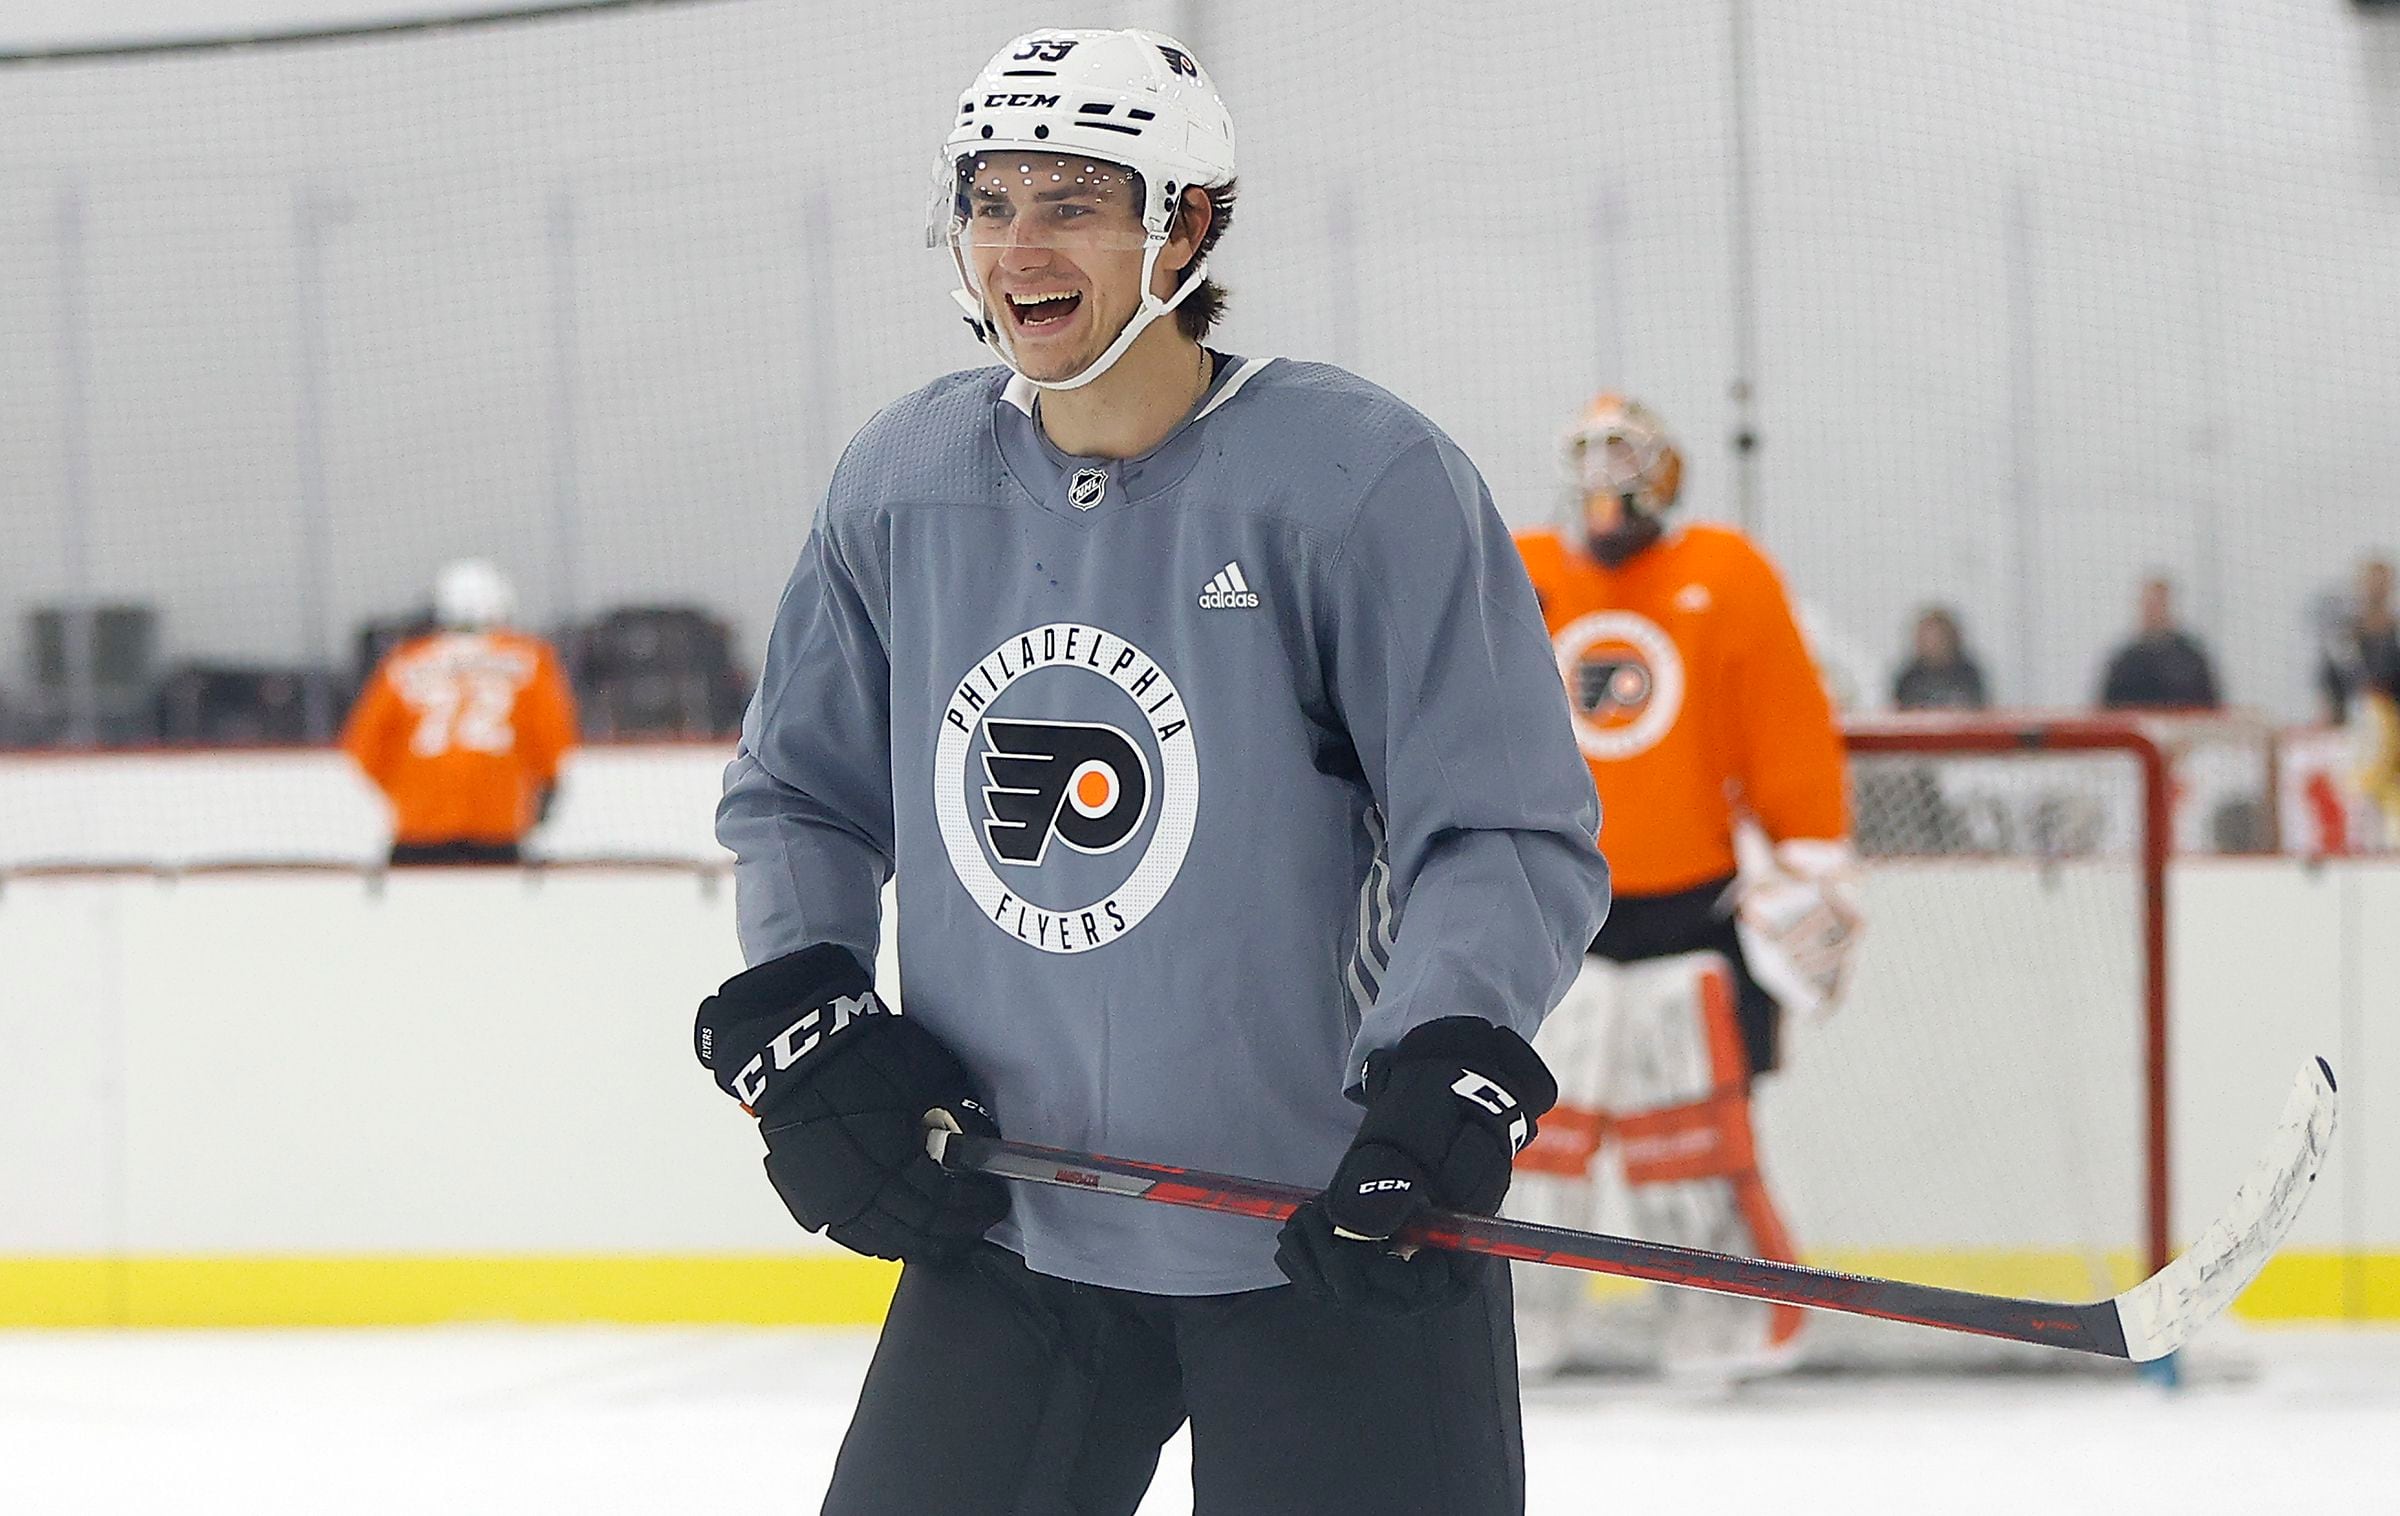 Flyers' Briere shedding 'interim' GM label is inevitable